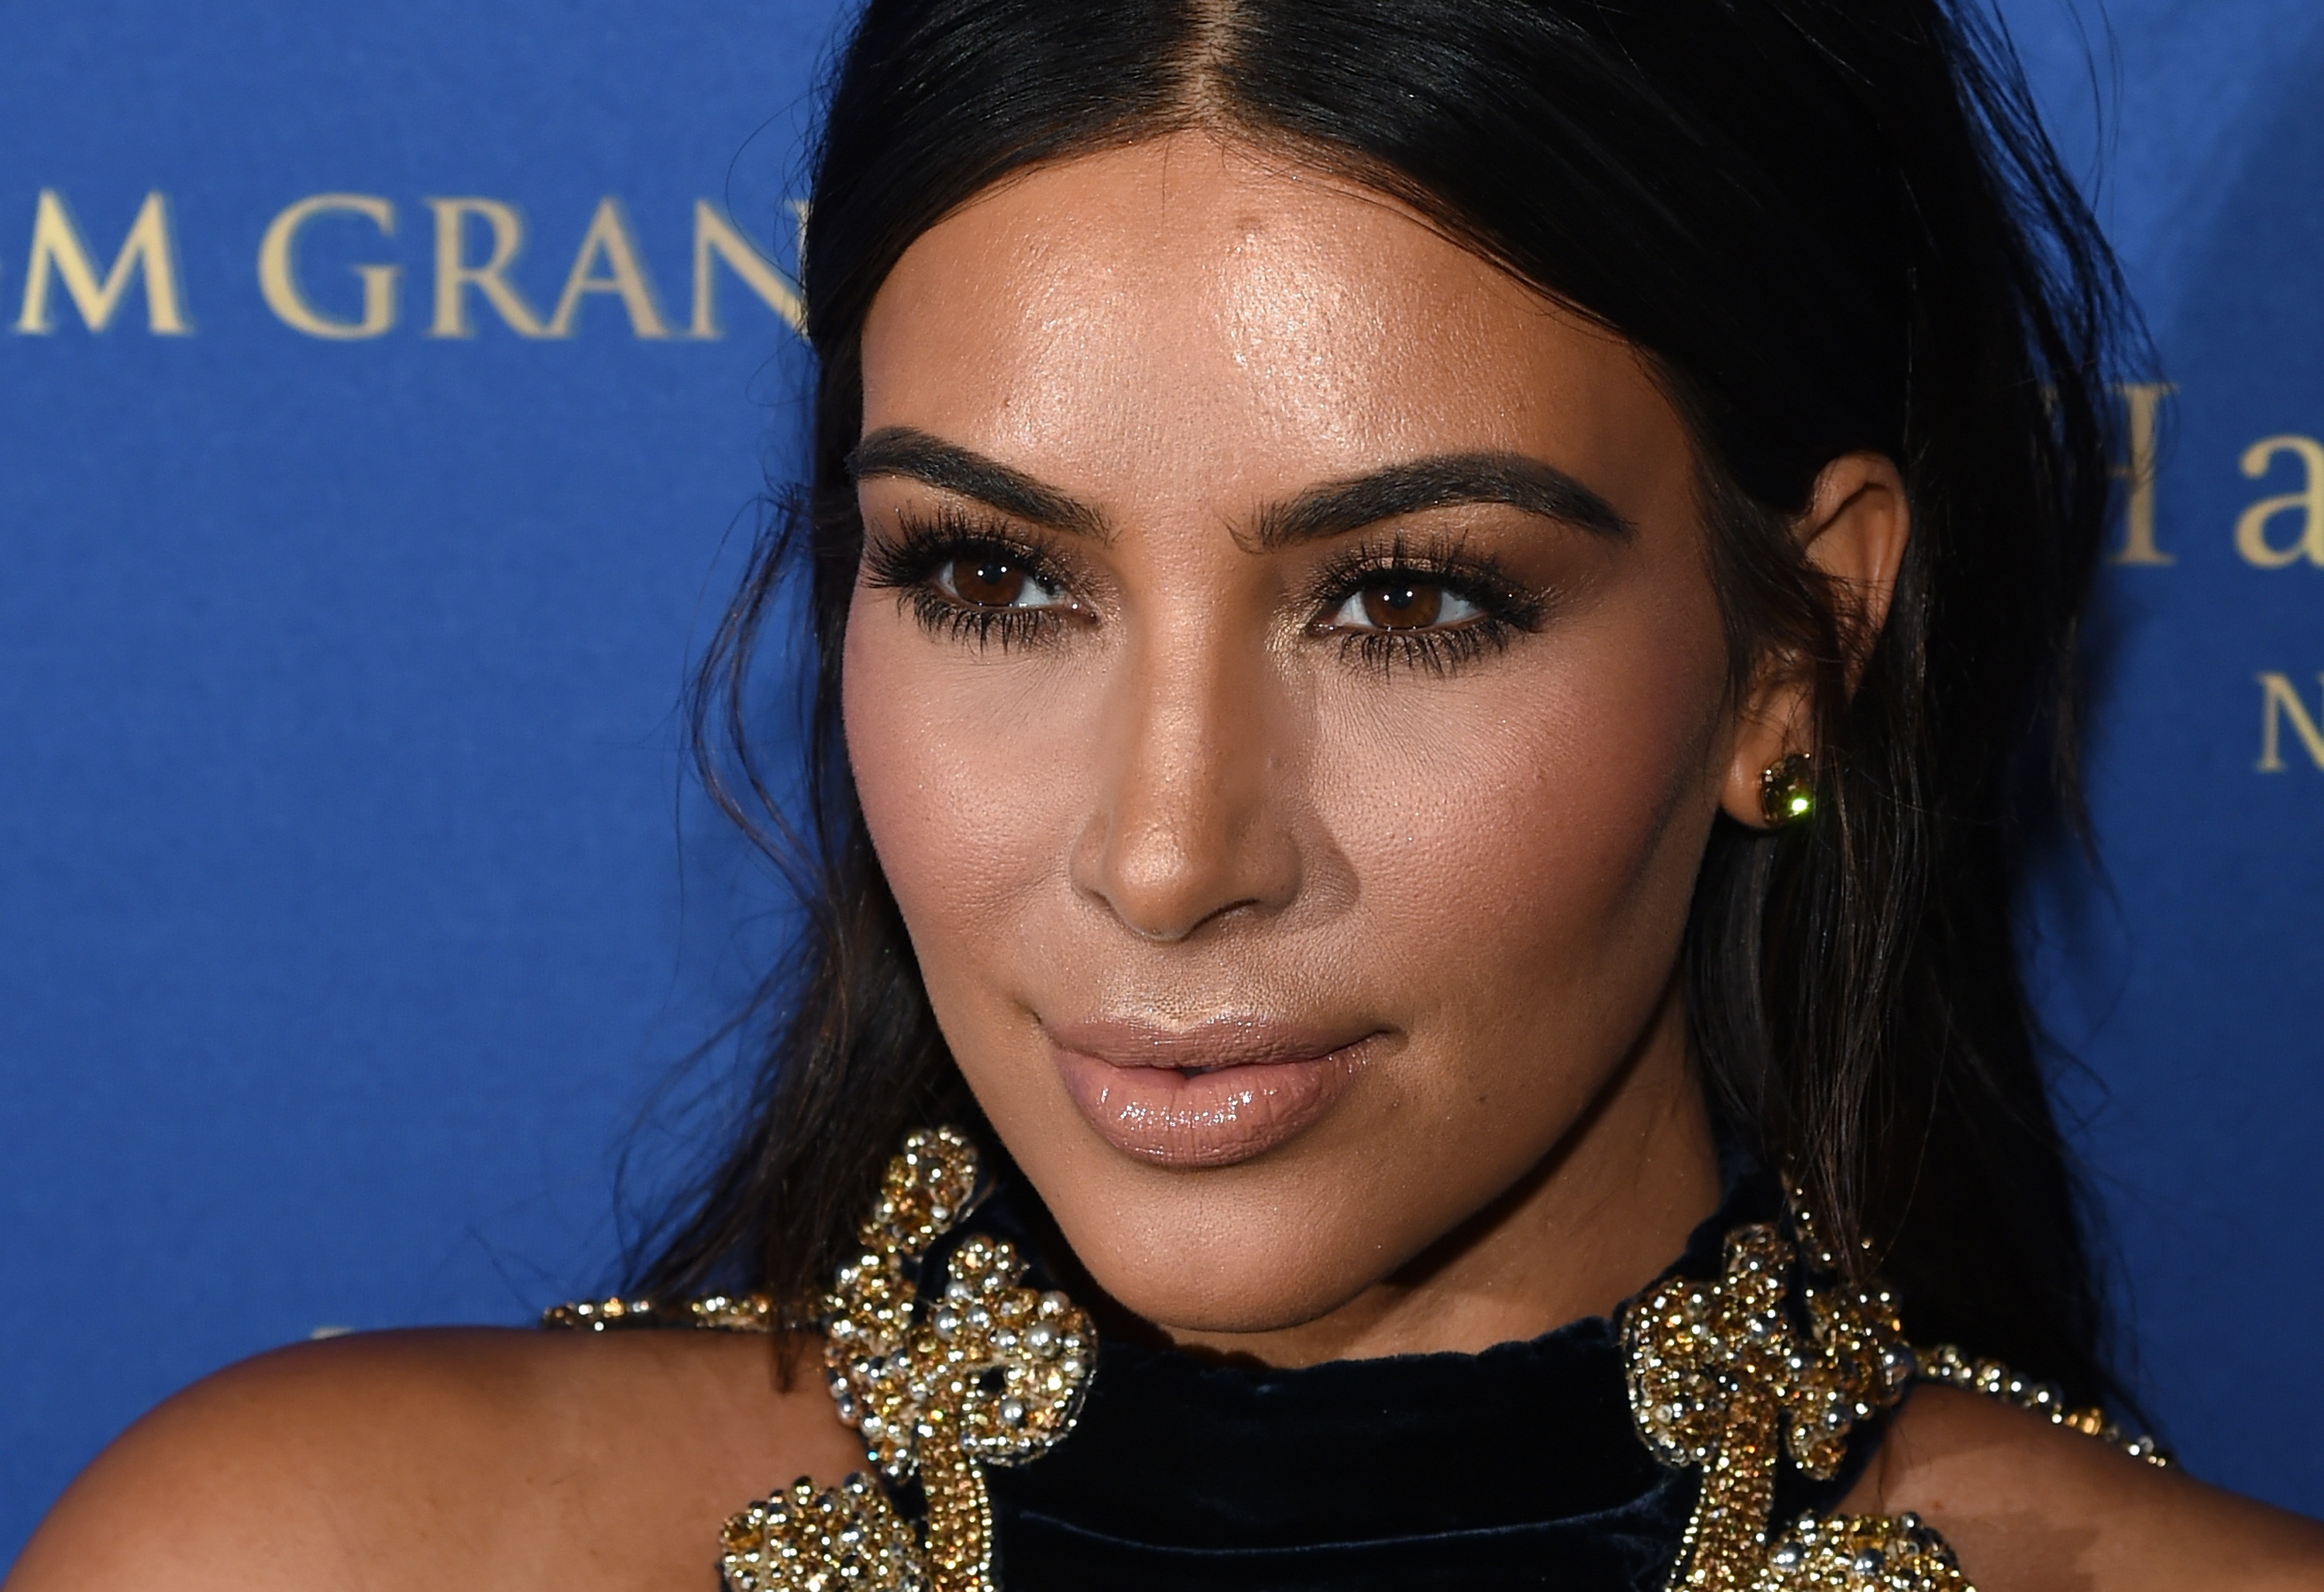 11 Kim Kardashian Approved Affordable Makeup Products From Her